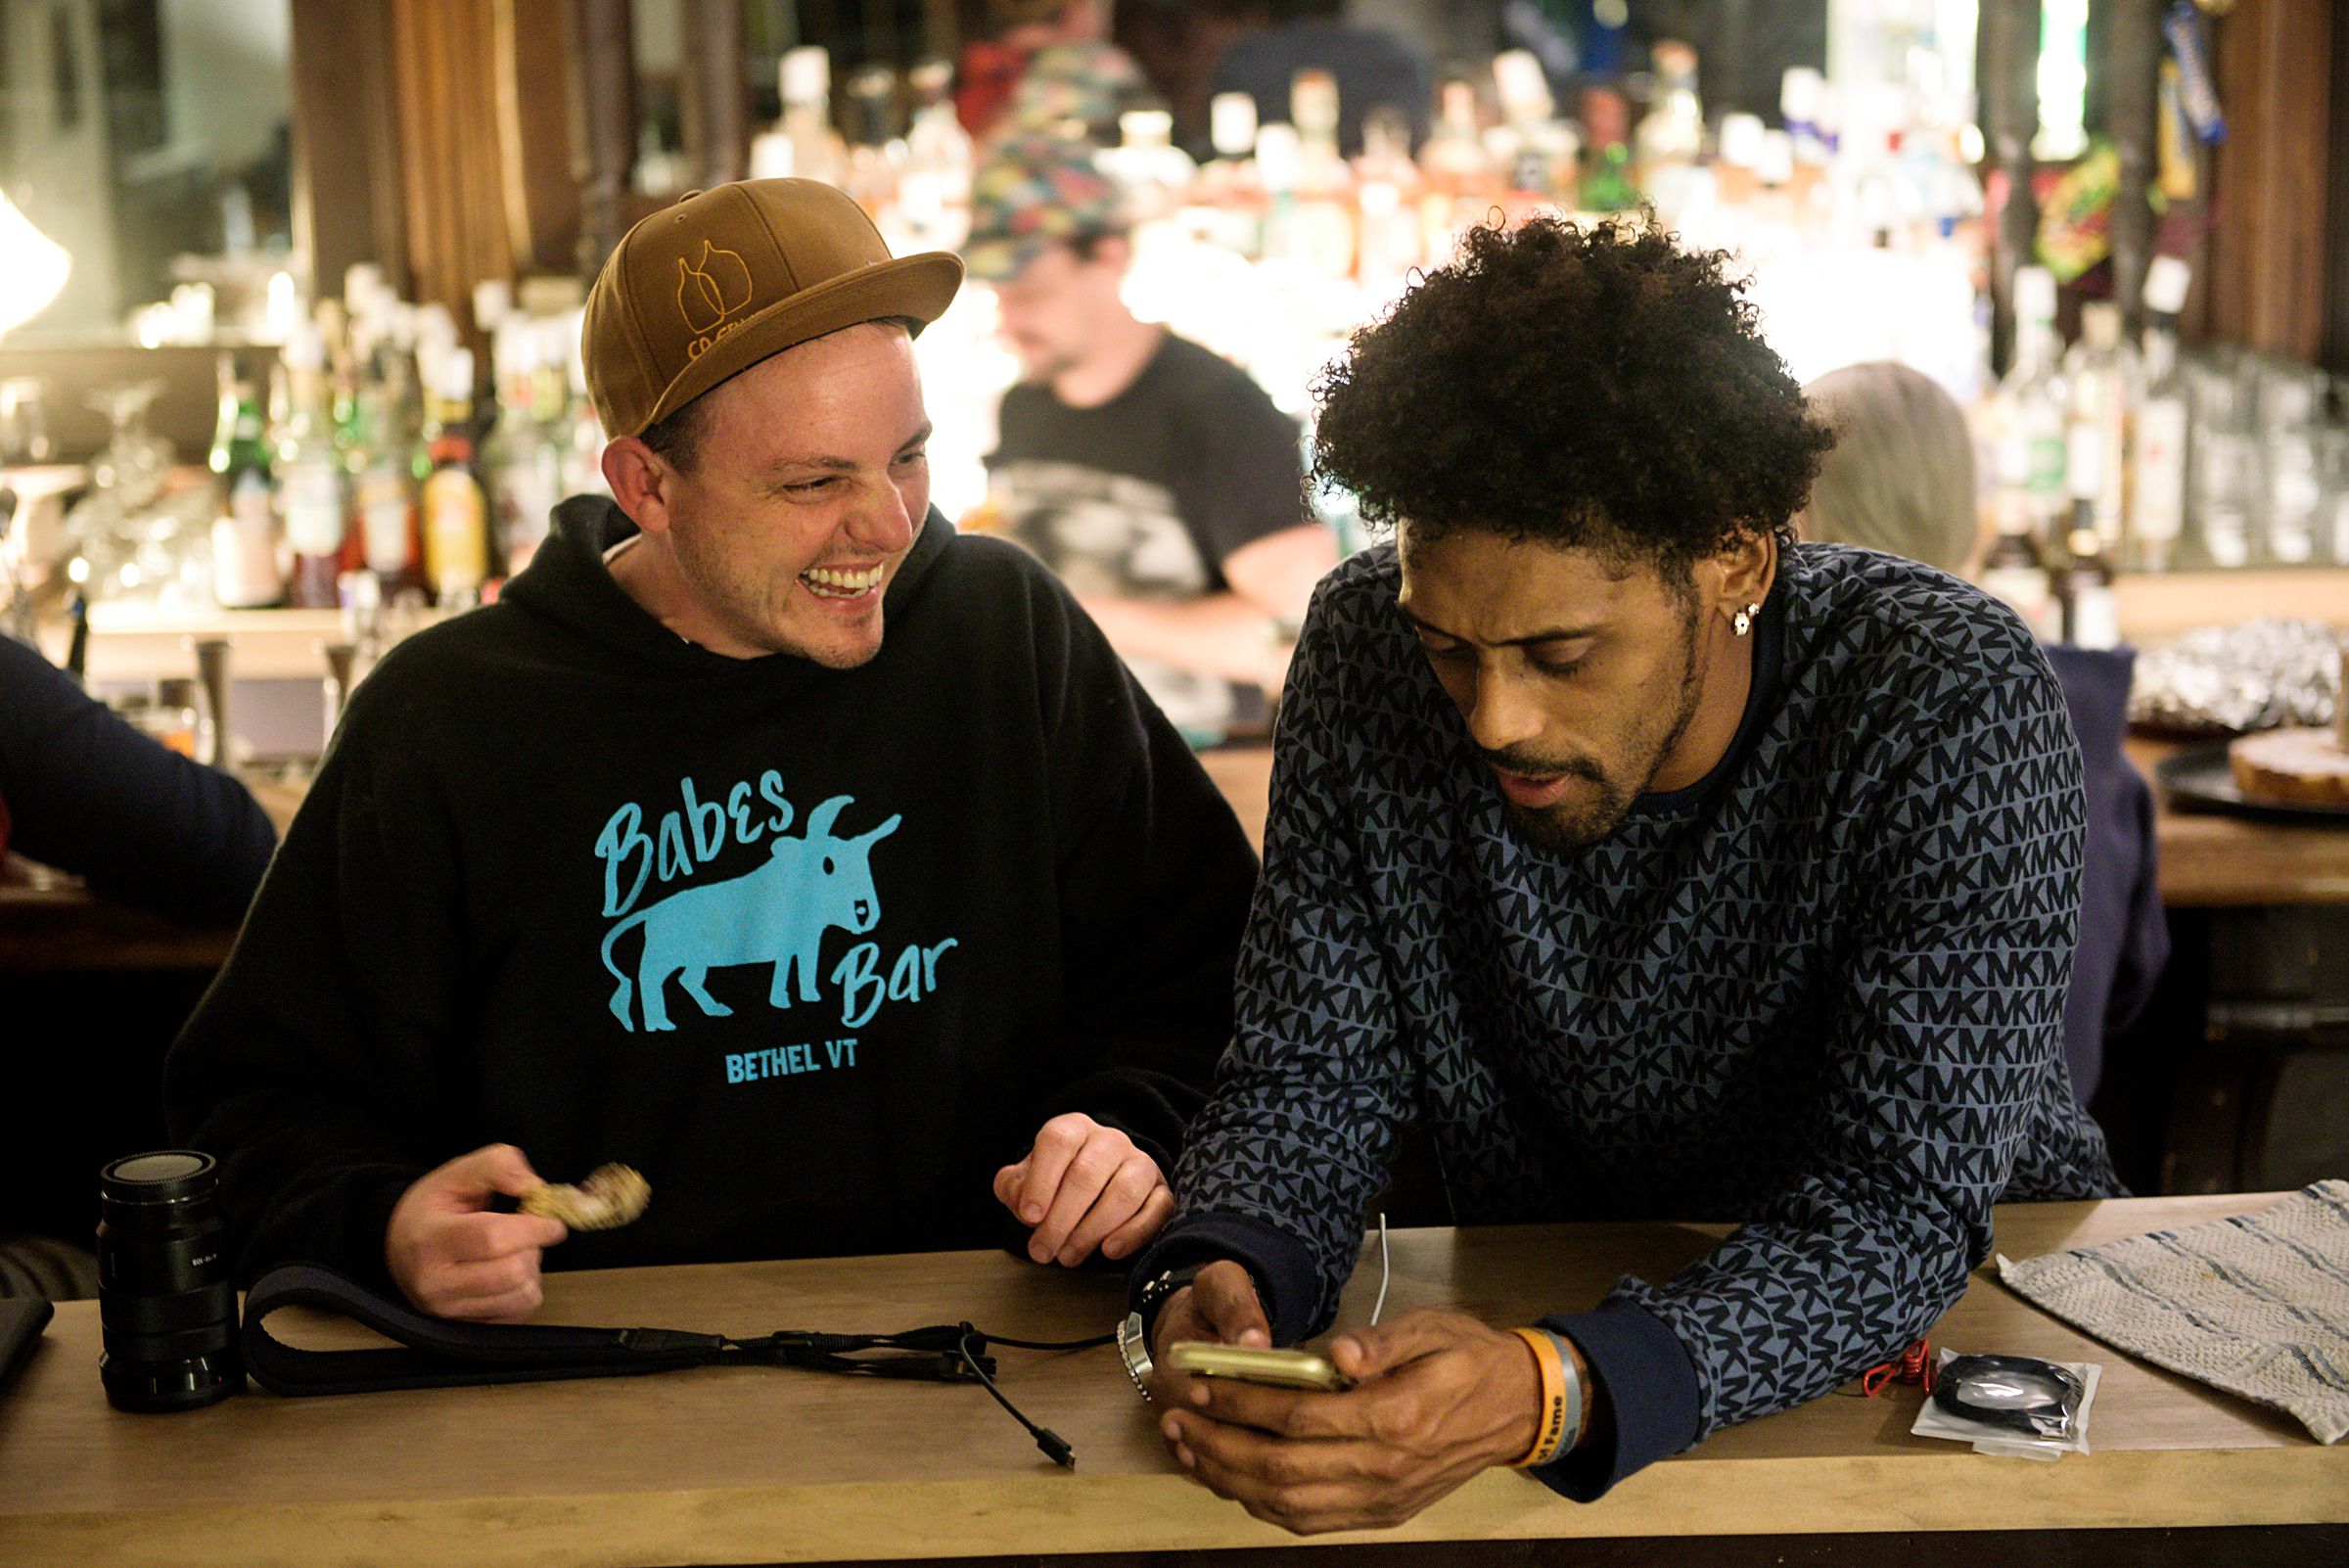 Owen Daniel-McCarter, co-owner of Babes Bar, left, talks with Tre Groves, of Braintree, right, in Bethel, Vt., Wednesday, Oct. 7, 2020. Daniel-McCarter and Jesse Plotsky, background, are working with Groves to develop a menu for a food trailer they plan to open outside the bar.  (Valley News - James M. Patterson) Copyright Valley News. May not be reprinted or used online without permission. Send requests to permission@vnews.com.